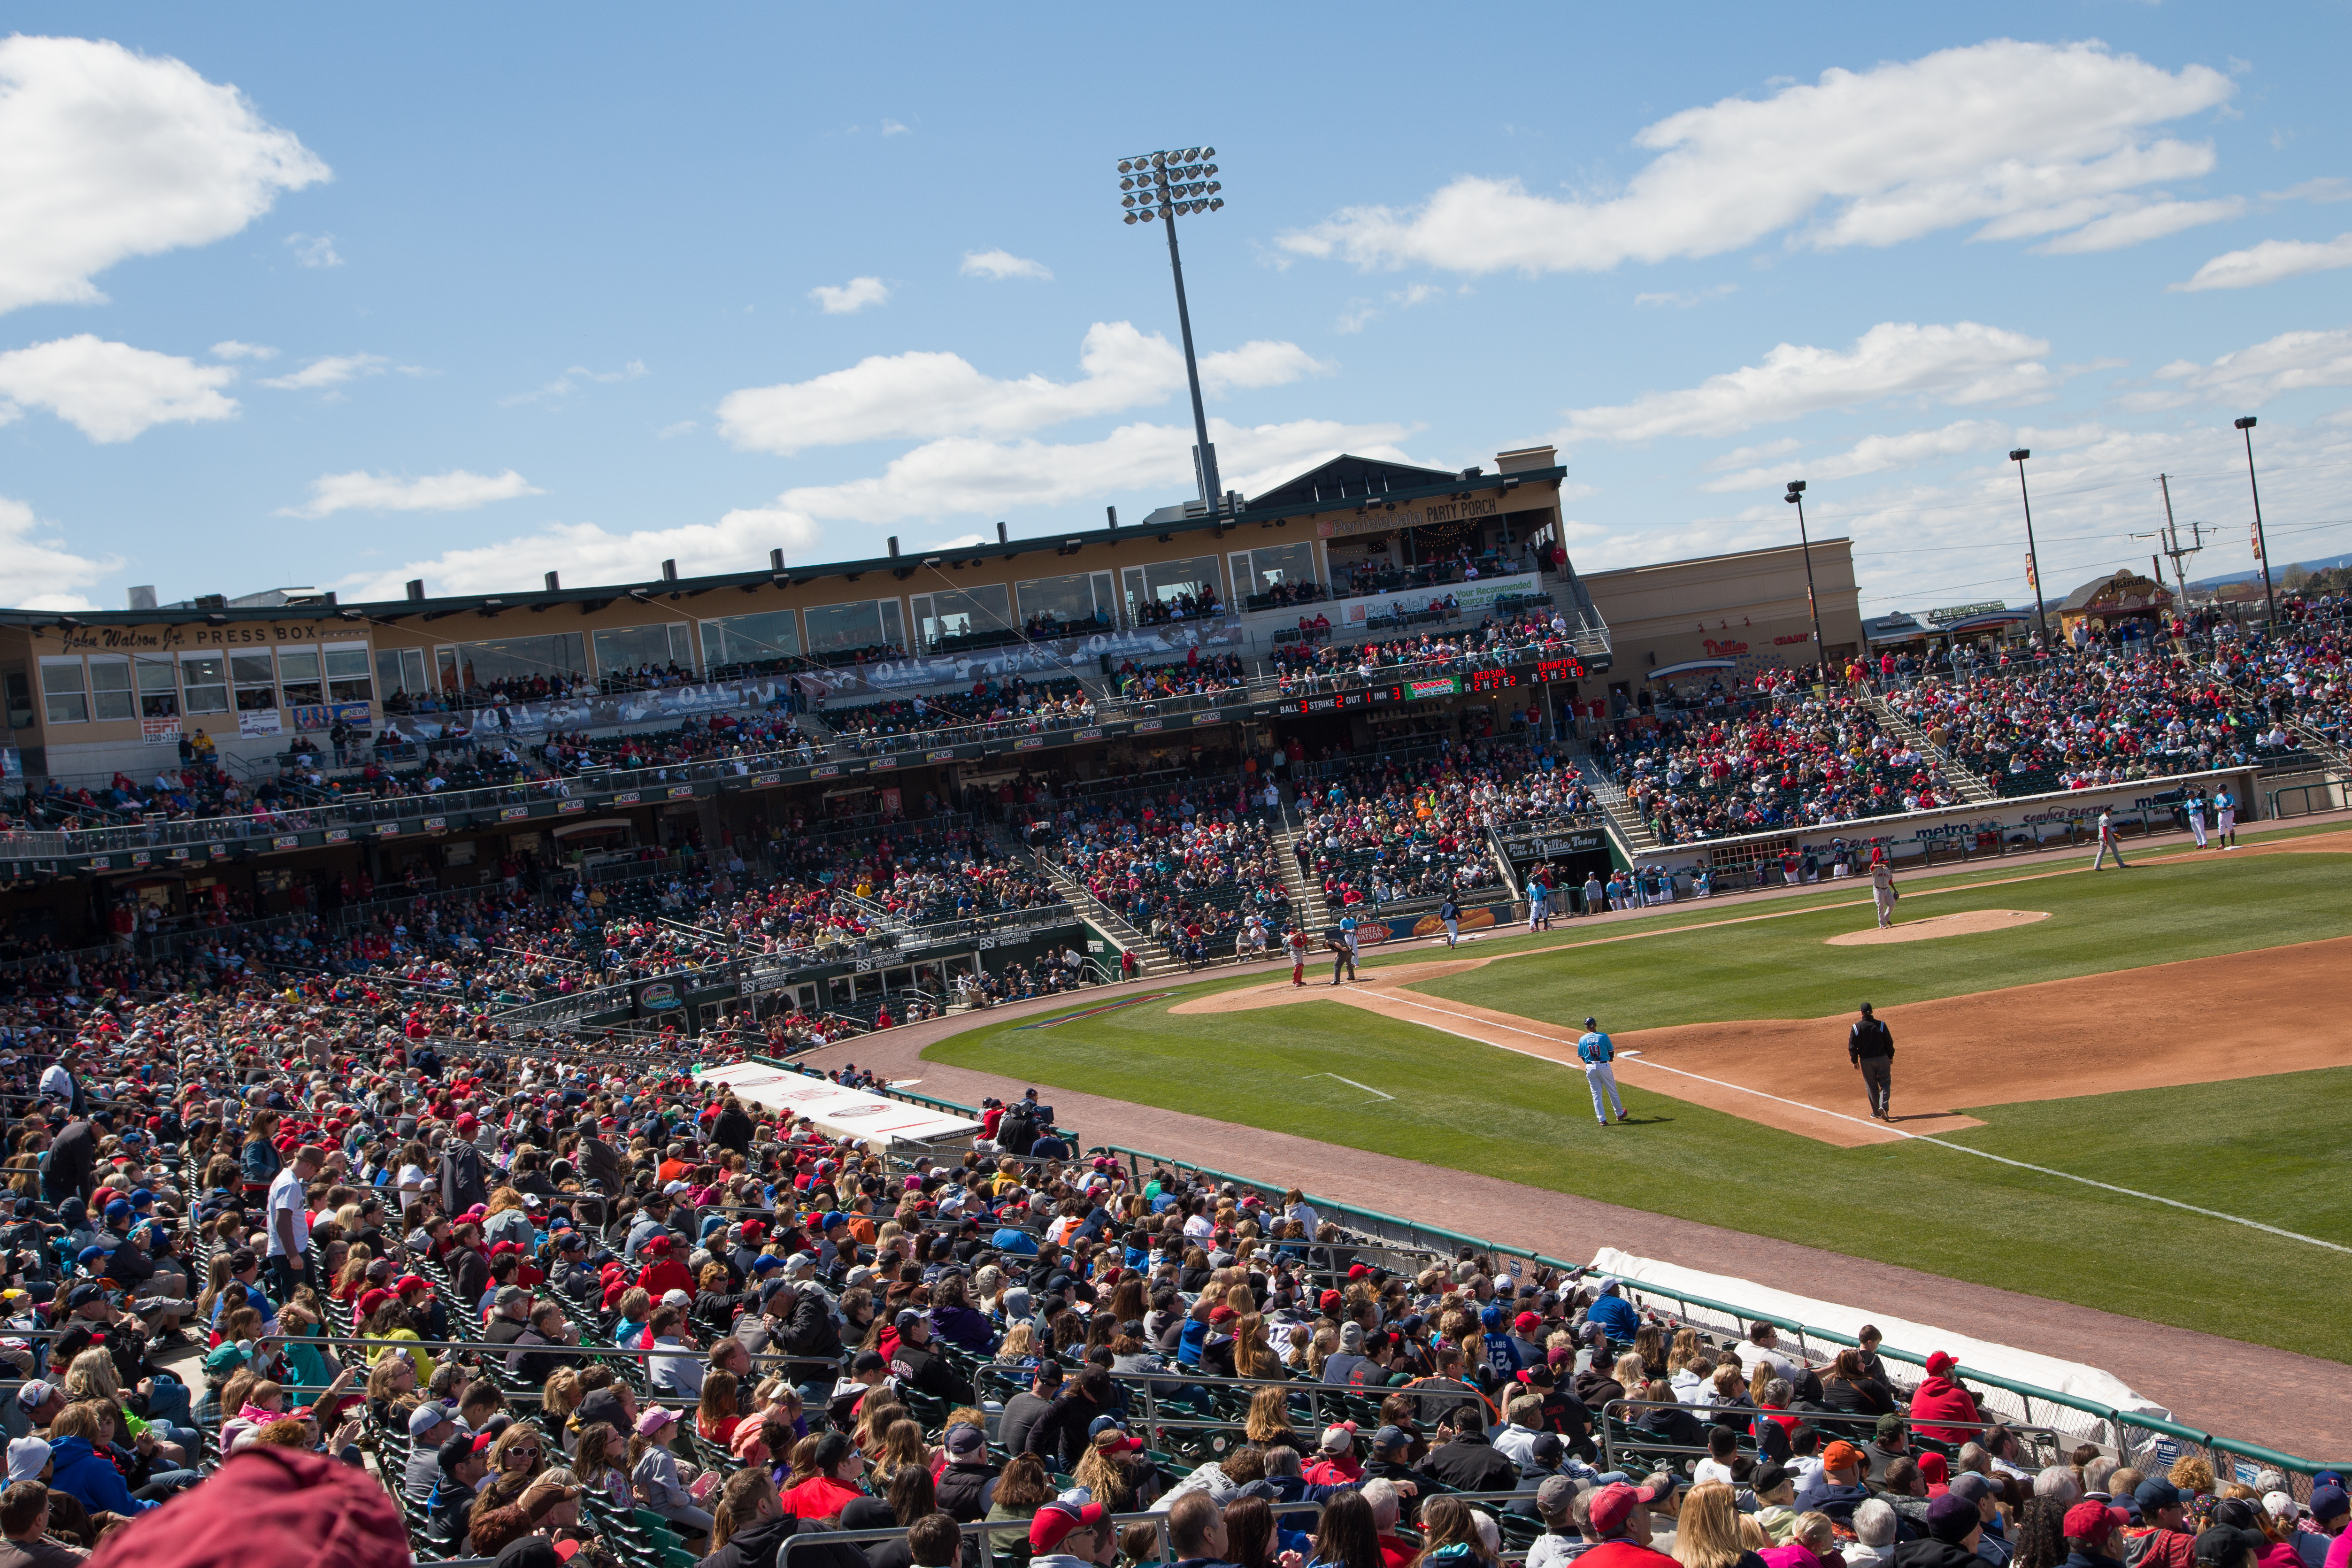 Lehigh Valley IronPigs on X: Our new @MajesticOnField Friday